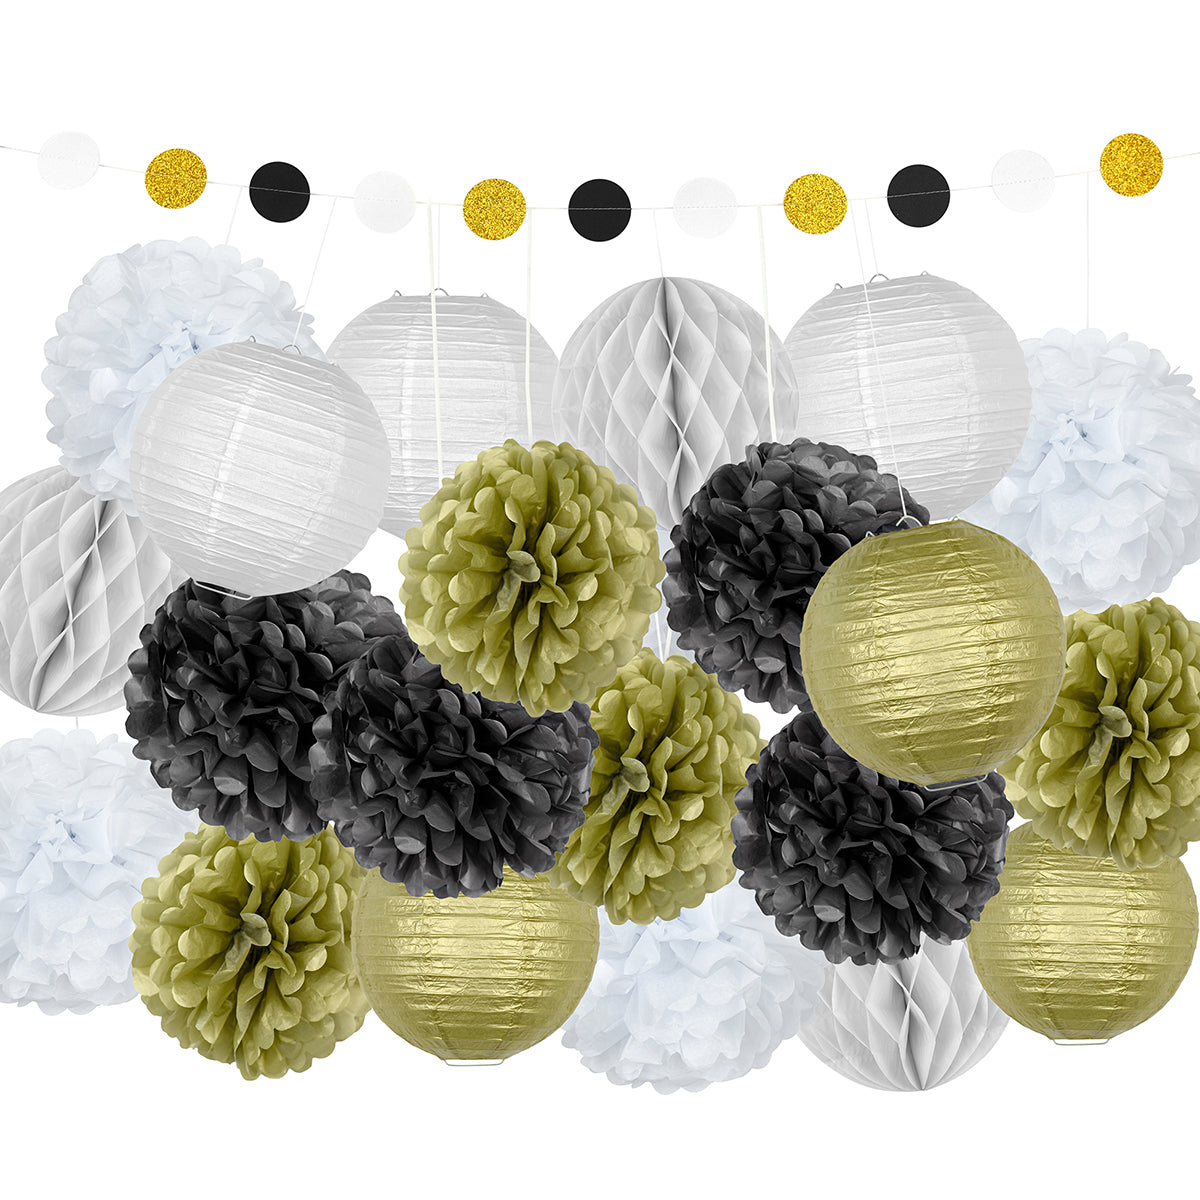 A party decoration set combine of 12 tissue paper pom poms, 6 lanterns, 4 honeycomb ball and a circle paper garland in gold, black and white color.